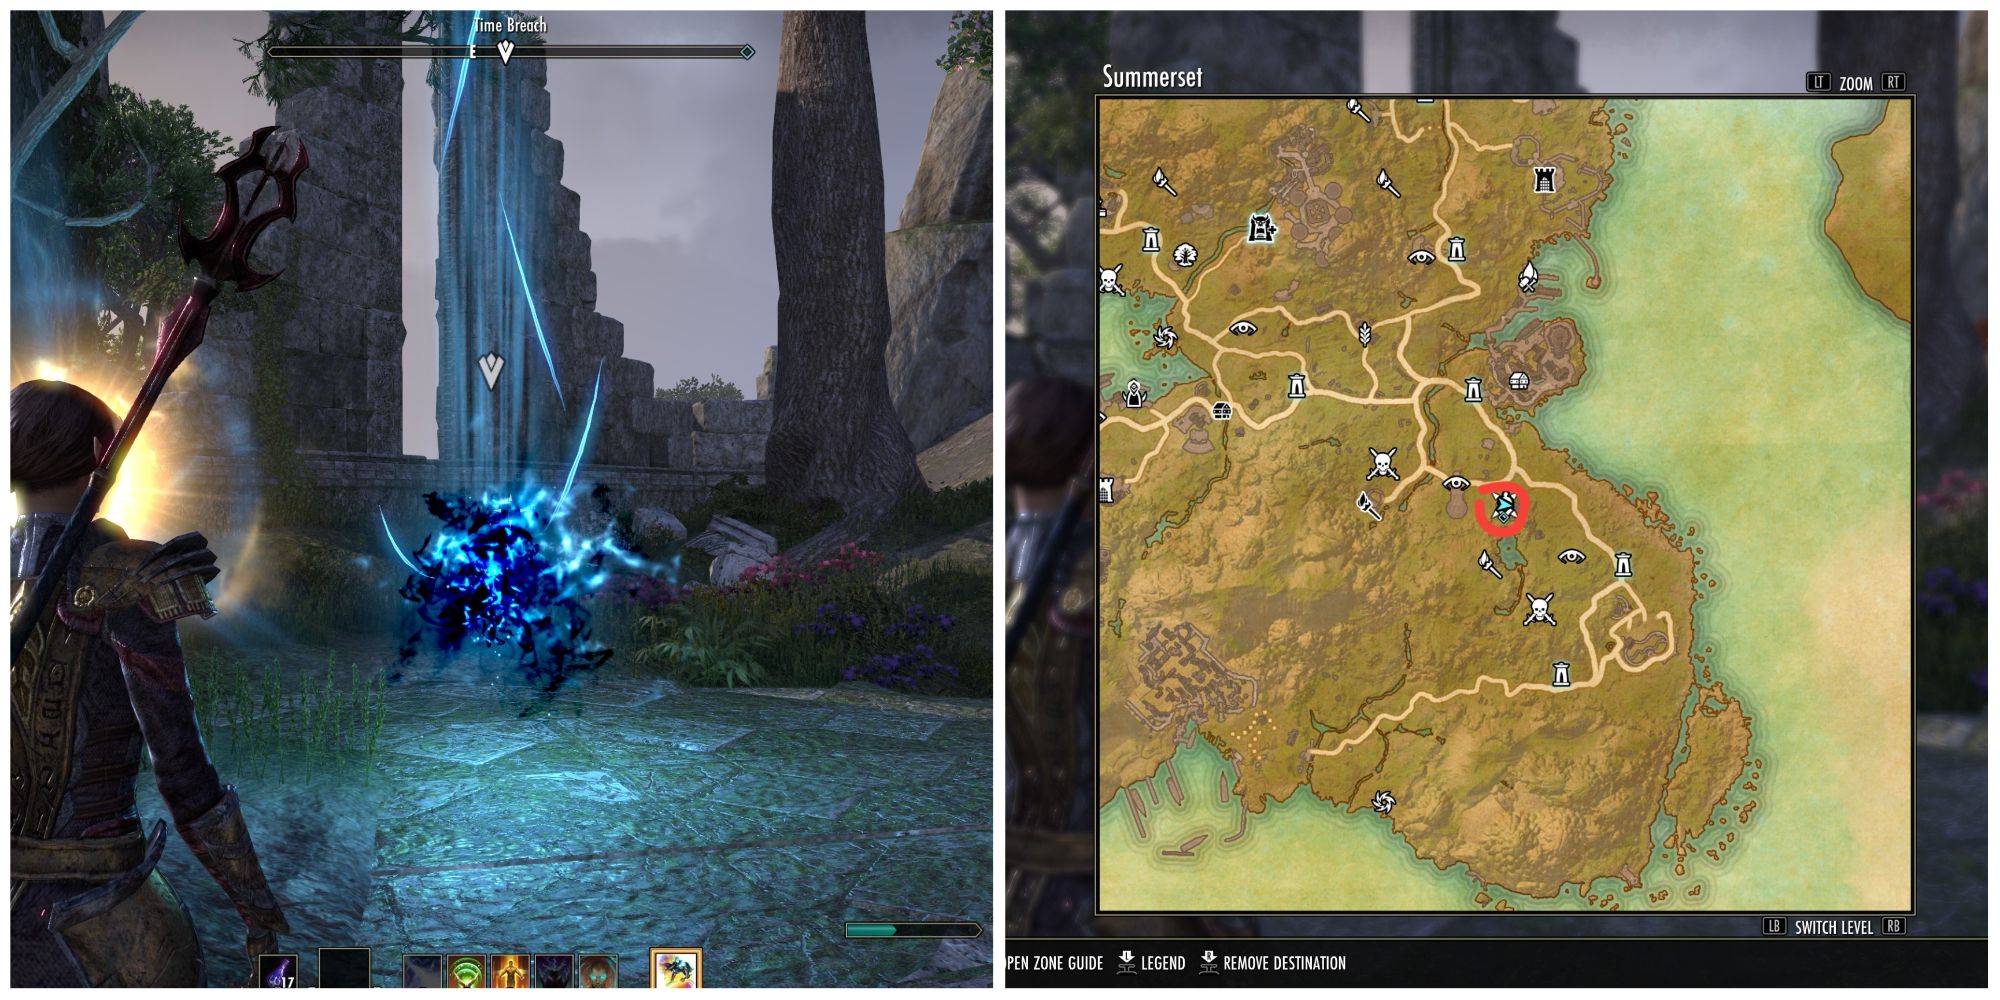 Sixth time breach location in Summerset